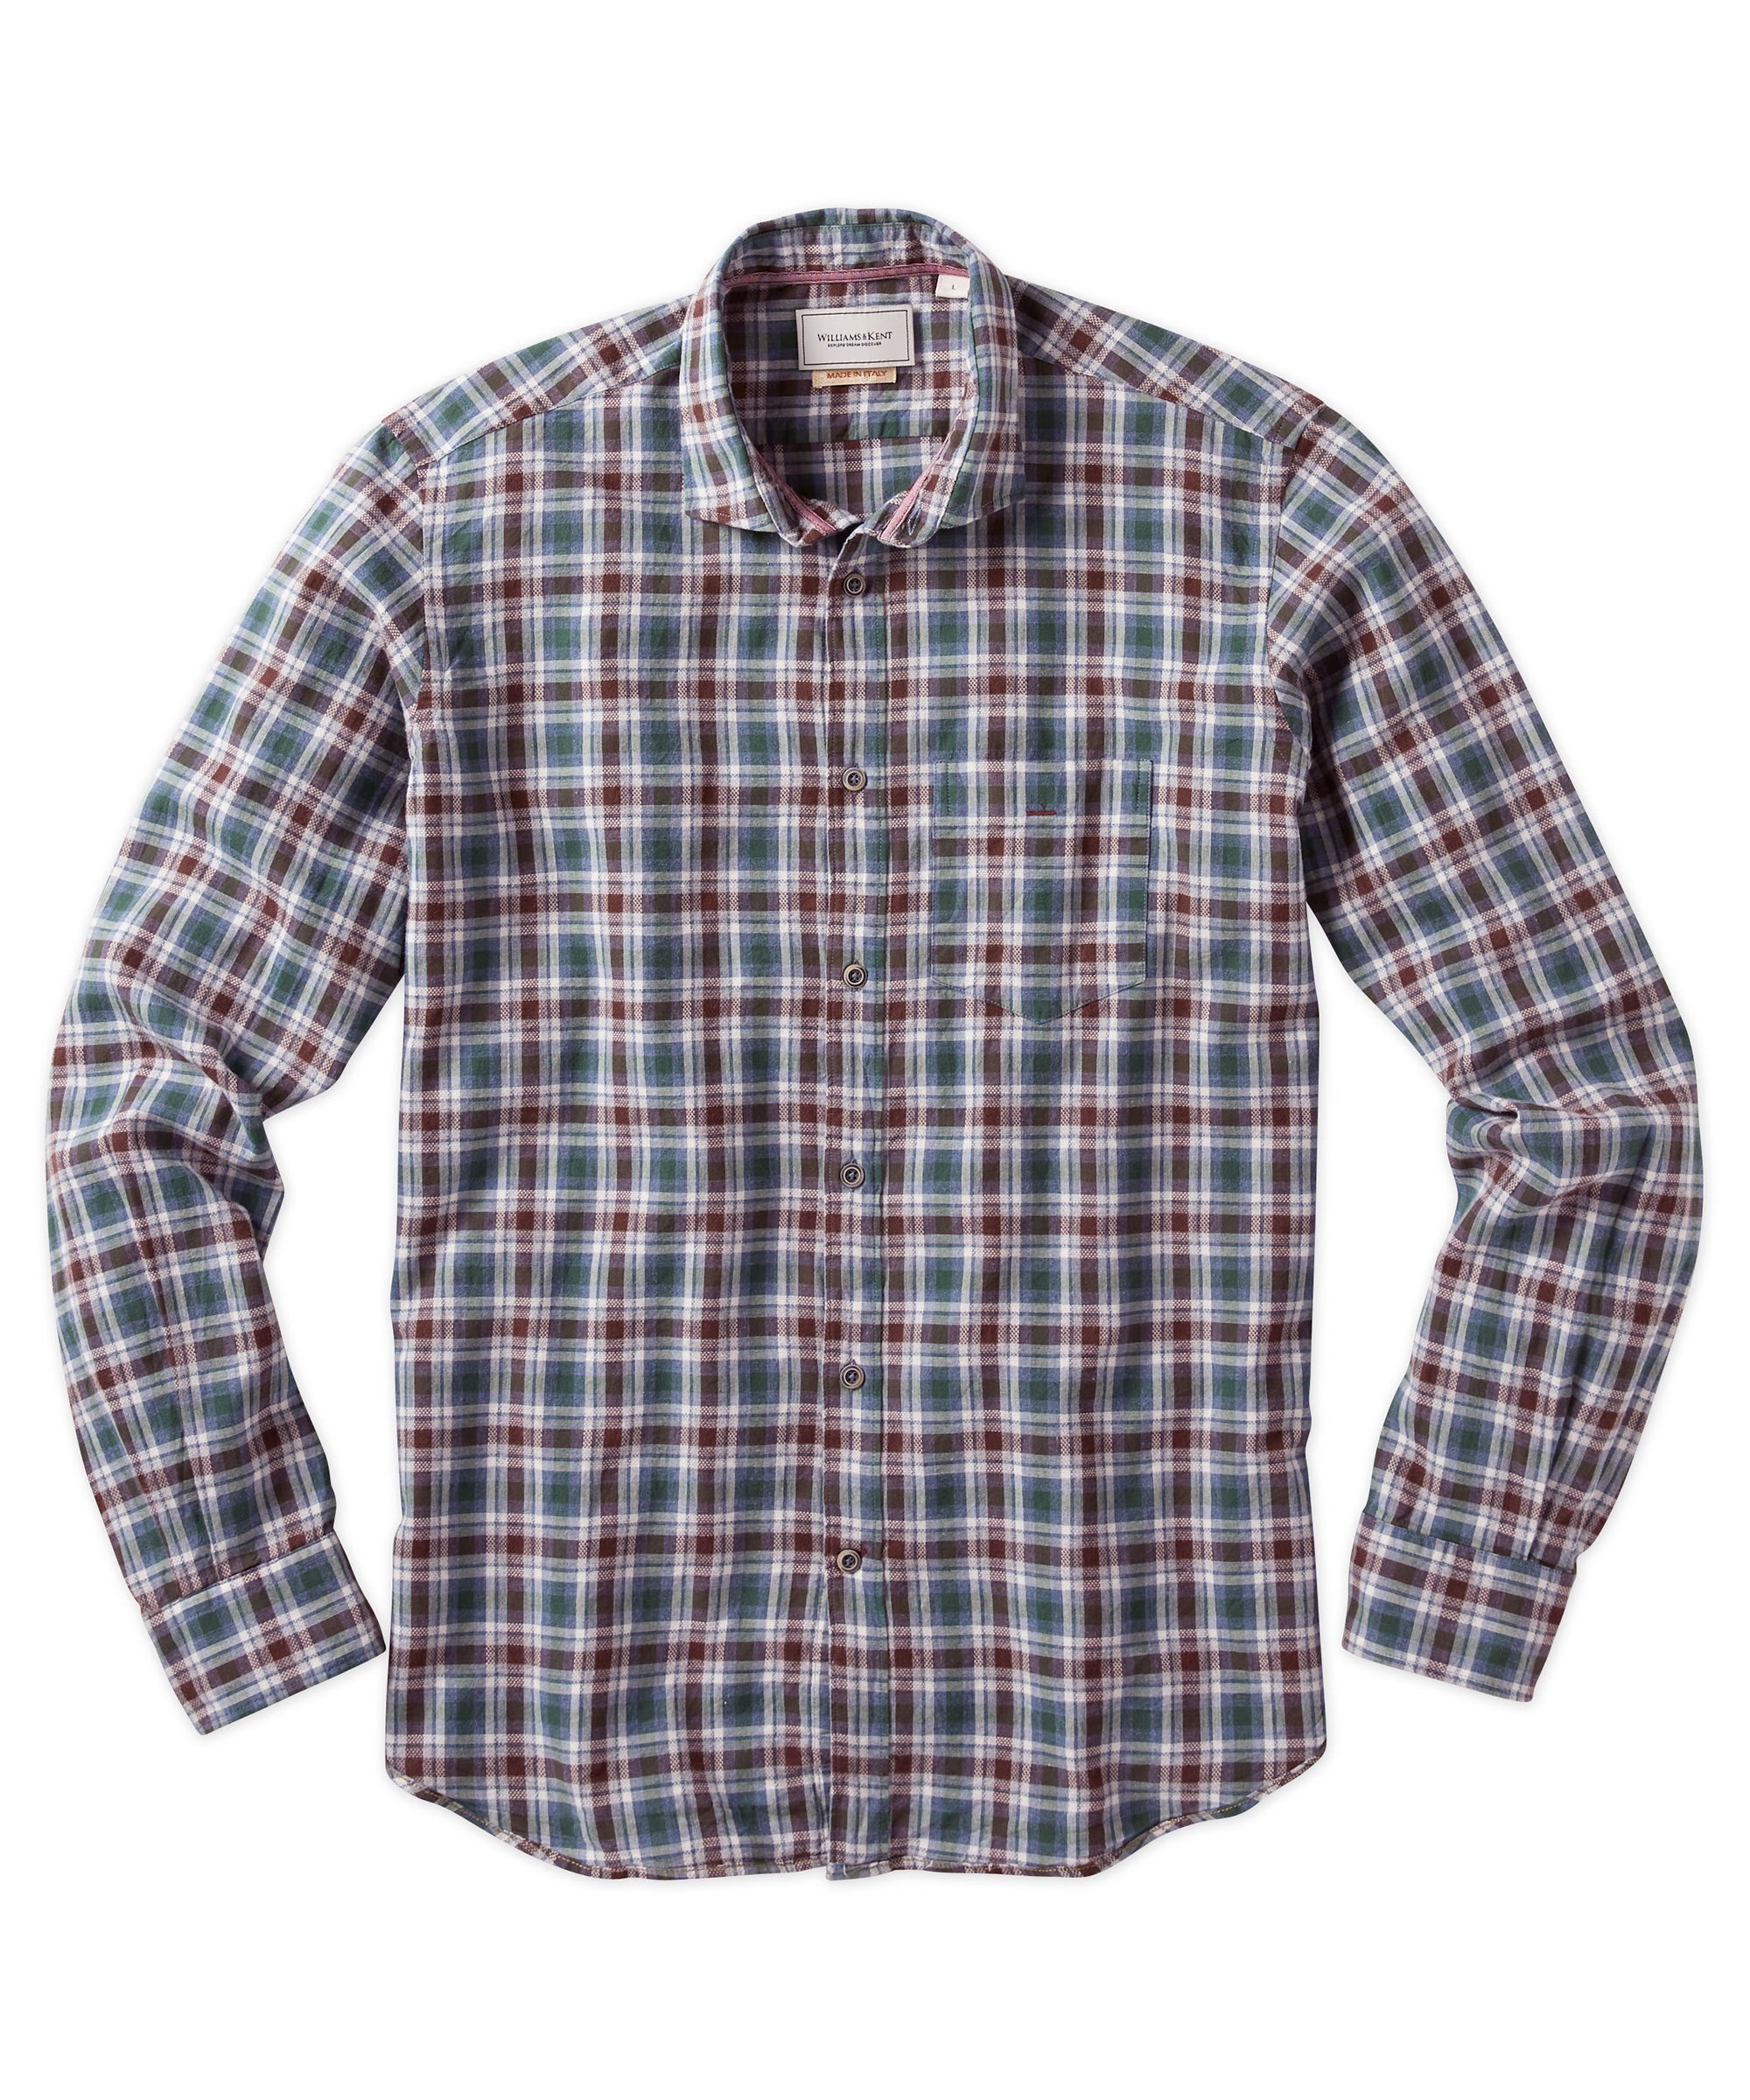 Autumn Brushed Twill Plaid Button-Down Long Sleeve Shirt